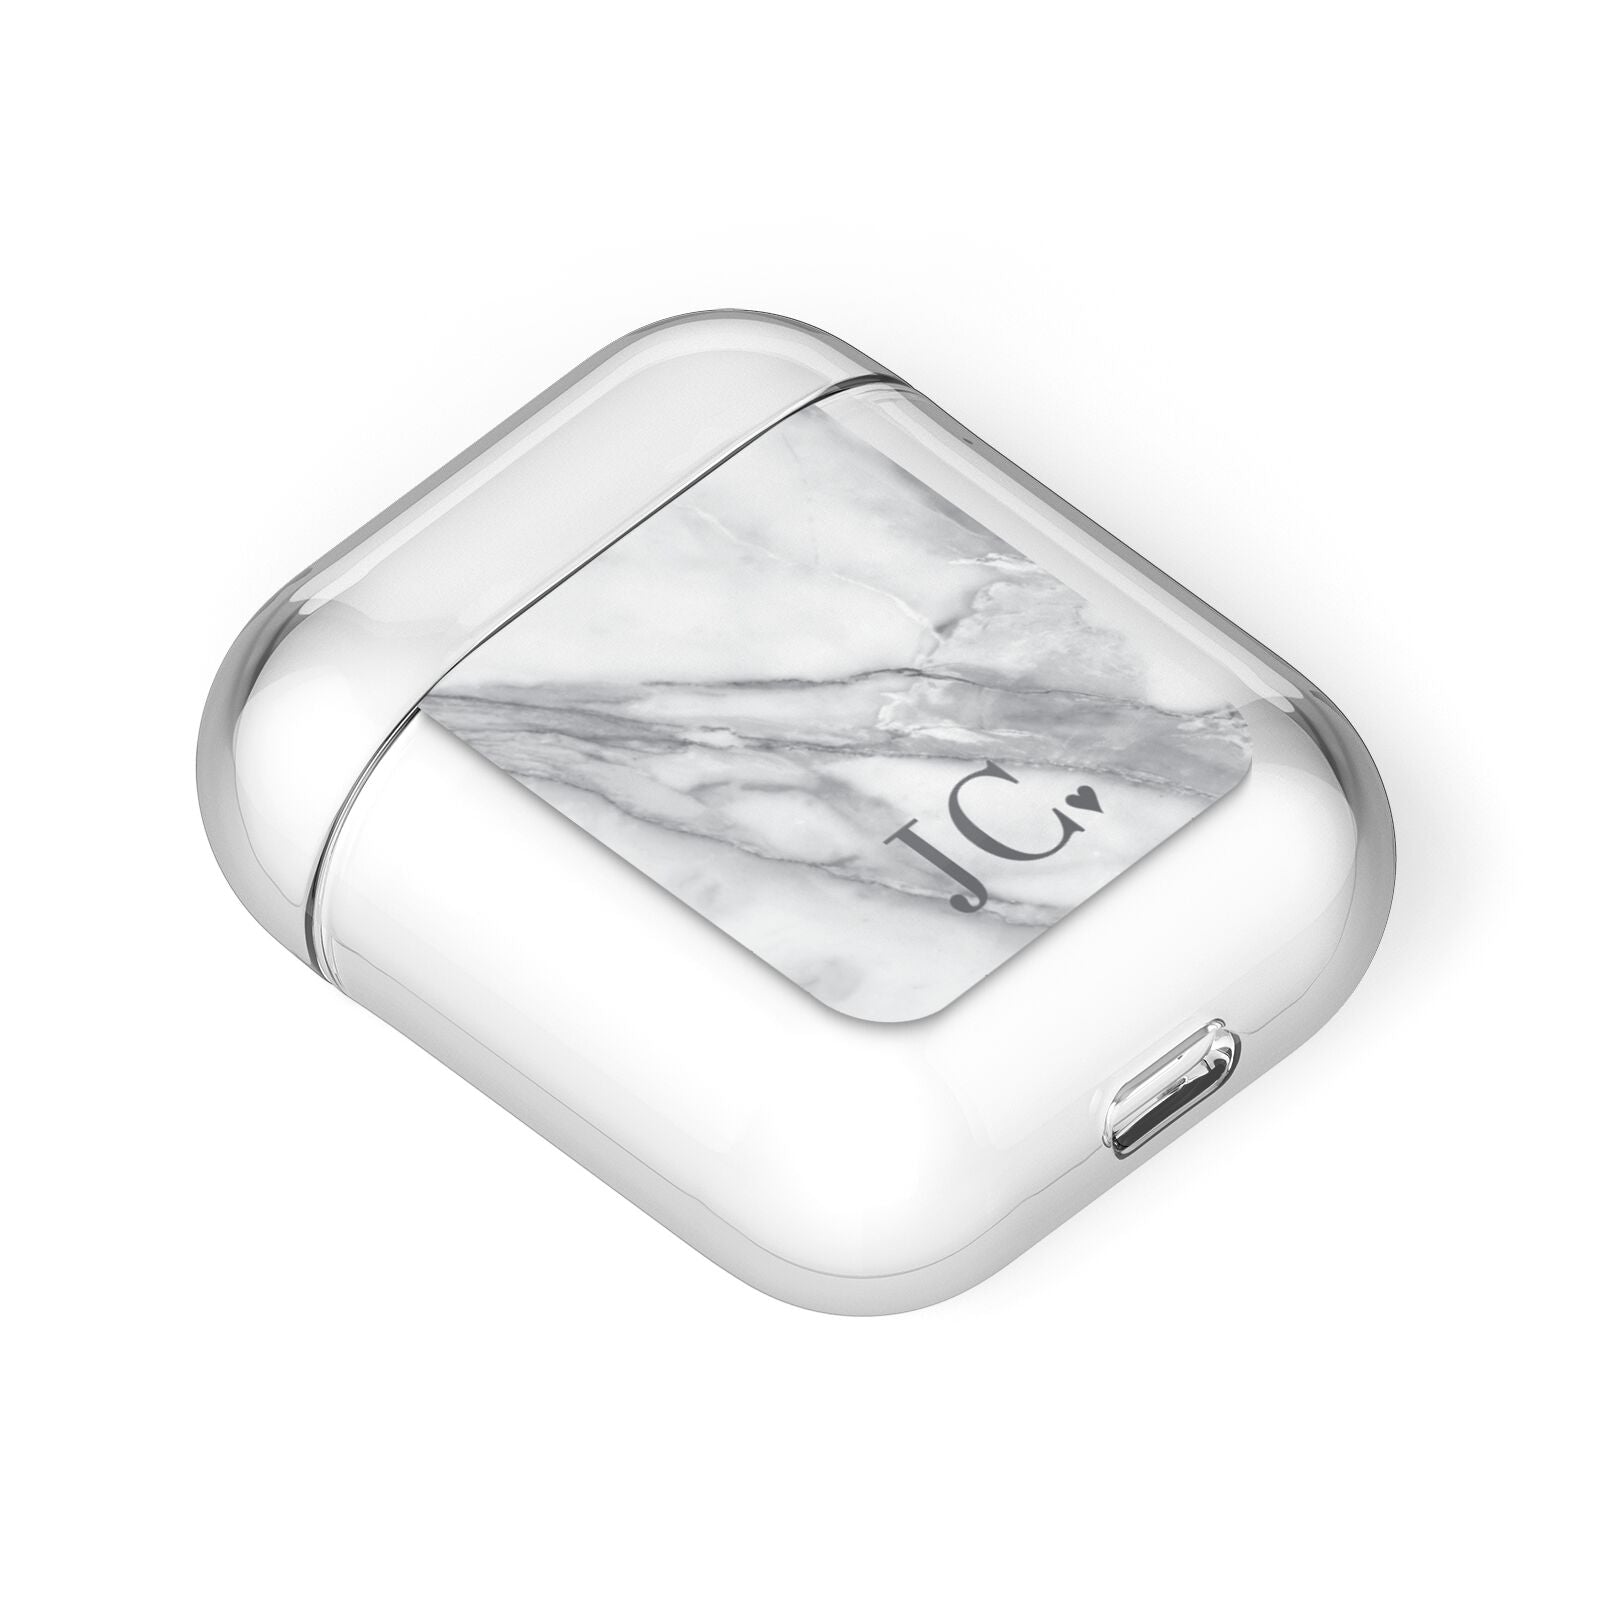 Initials Love Heart AirPods Case Laid Flat